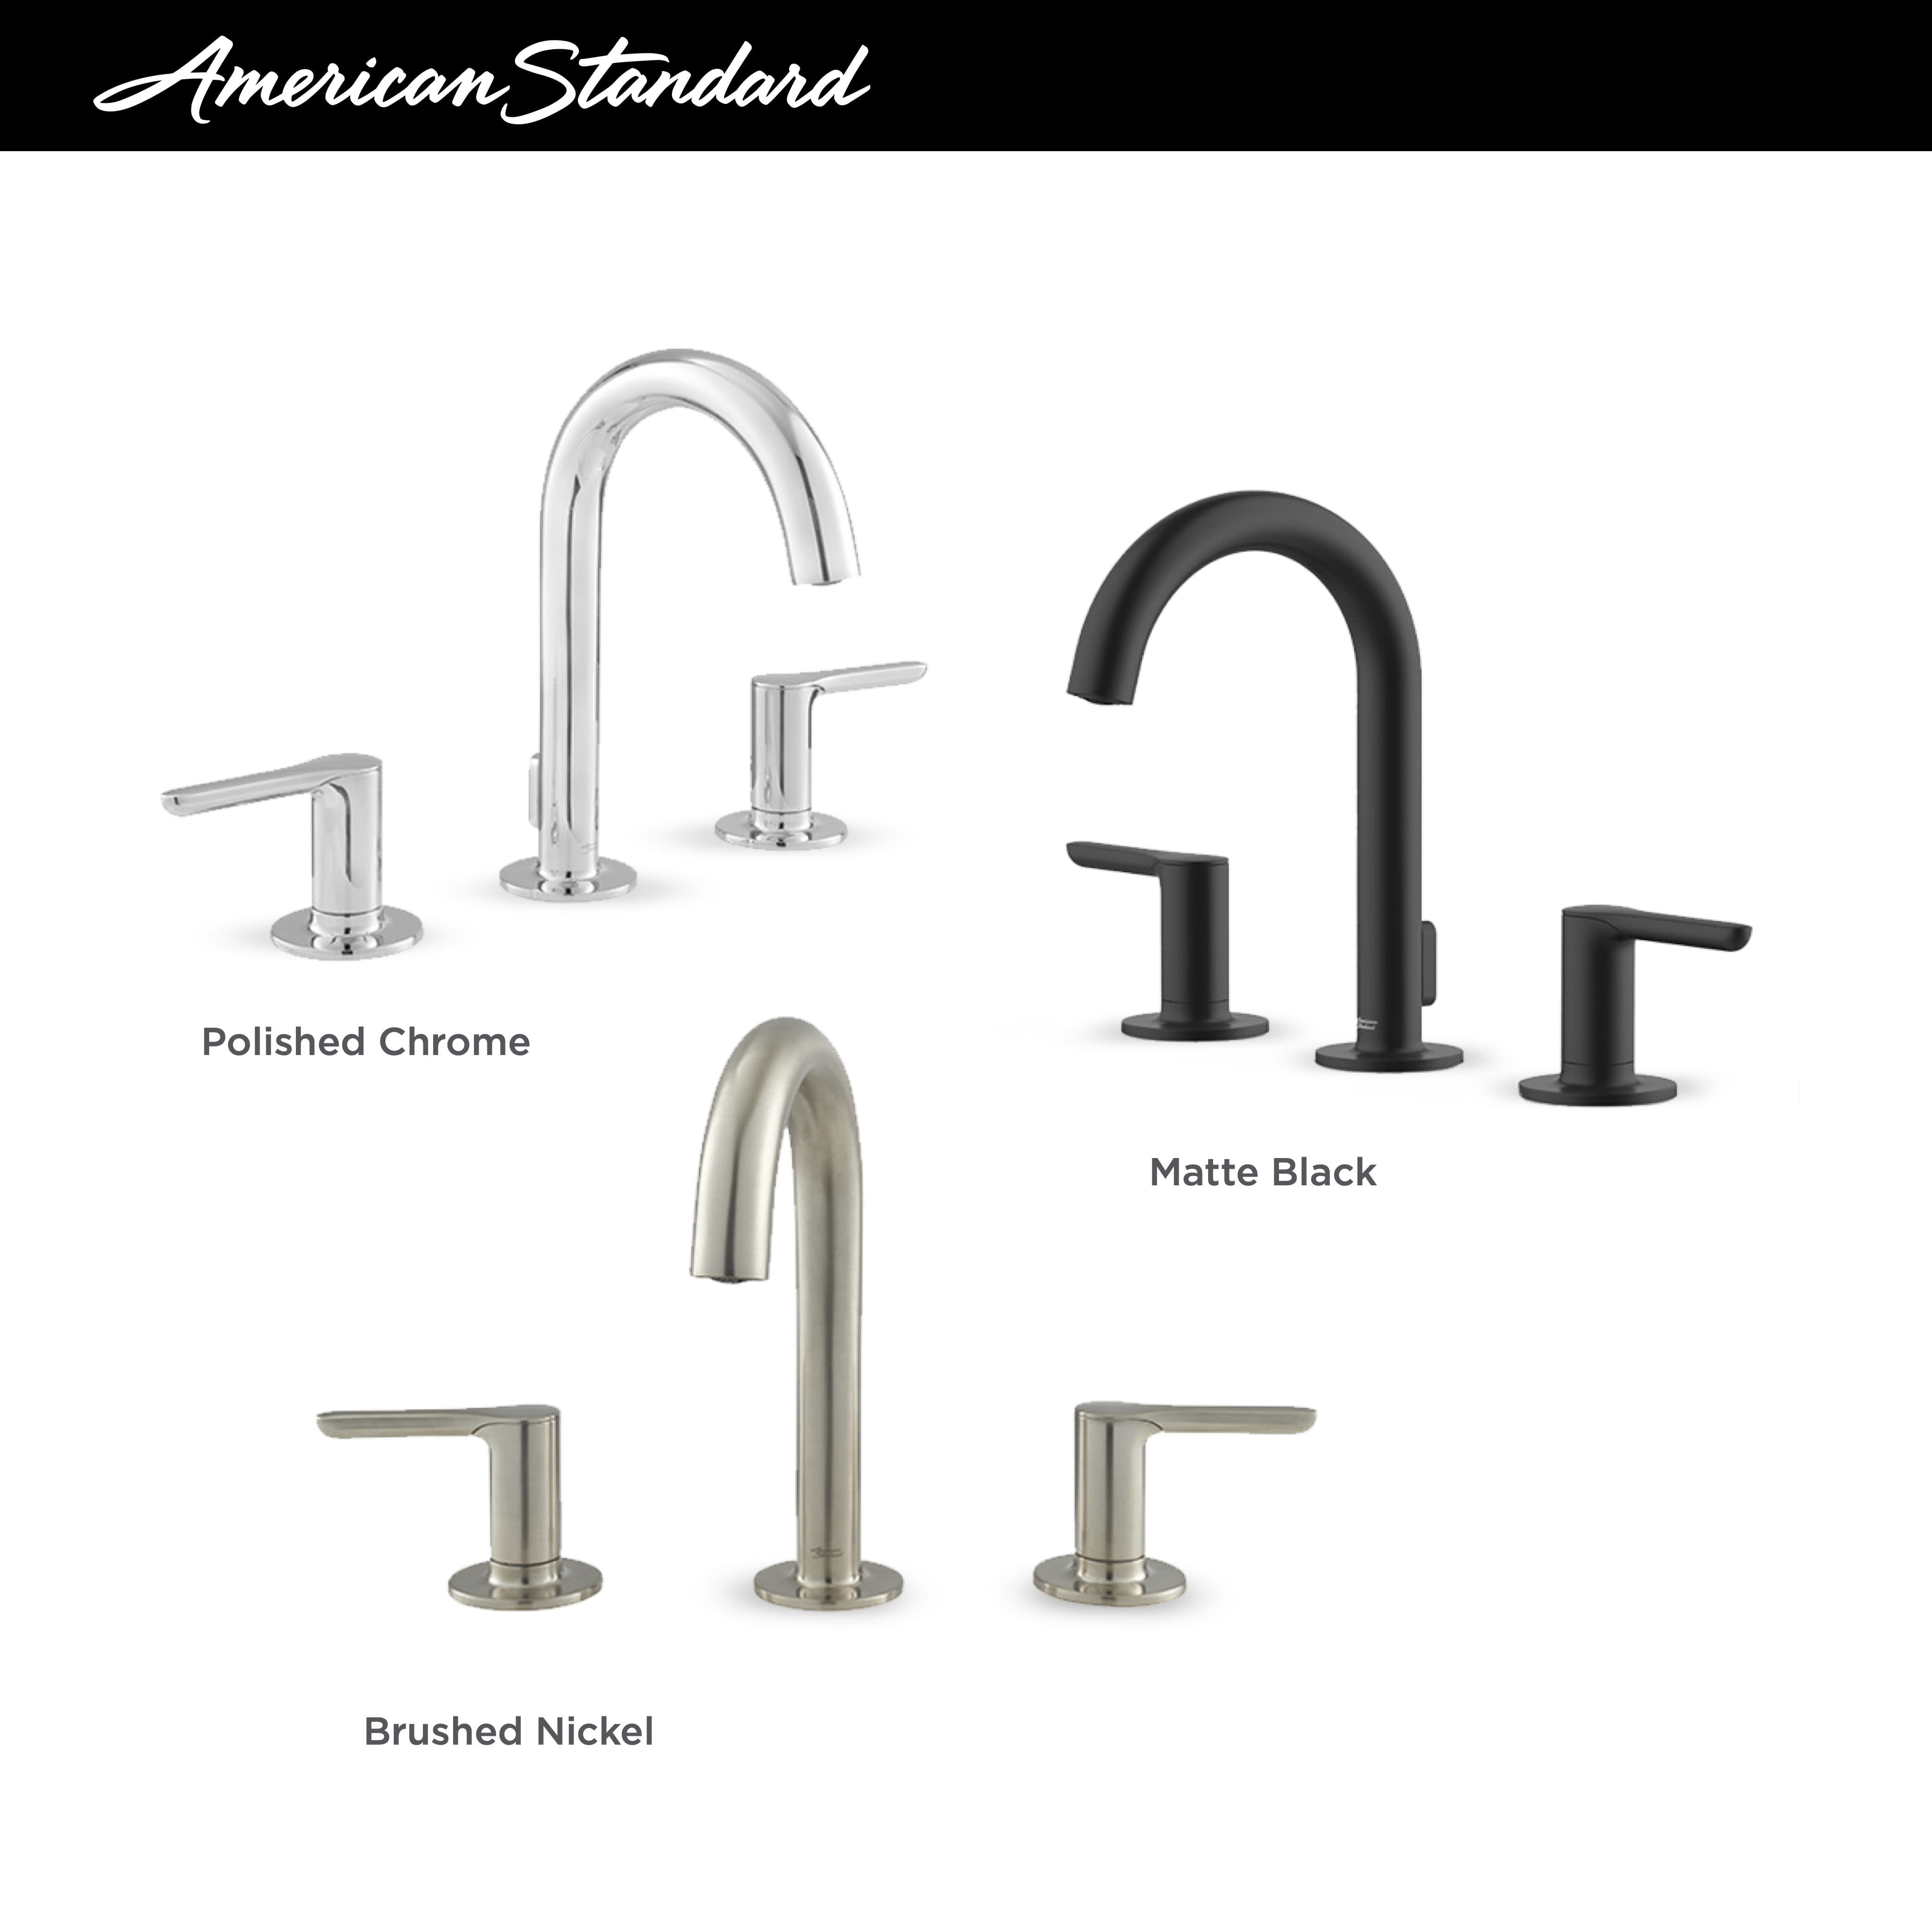 Studio® S 8-Inch Widespread 2-Handle Bathroom Faucet 1.2 gpm/4.5 L/min With Lever Handles